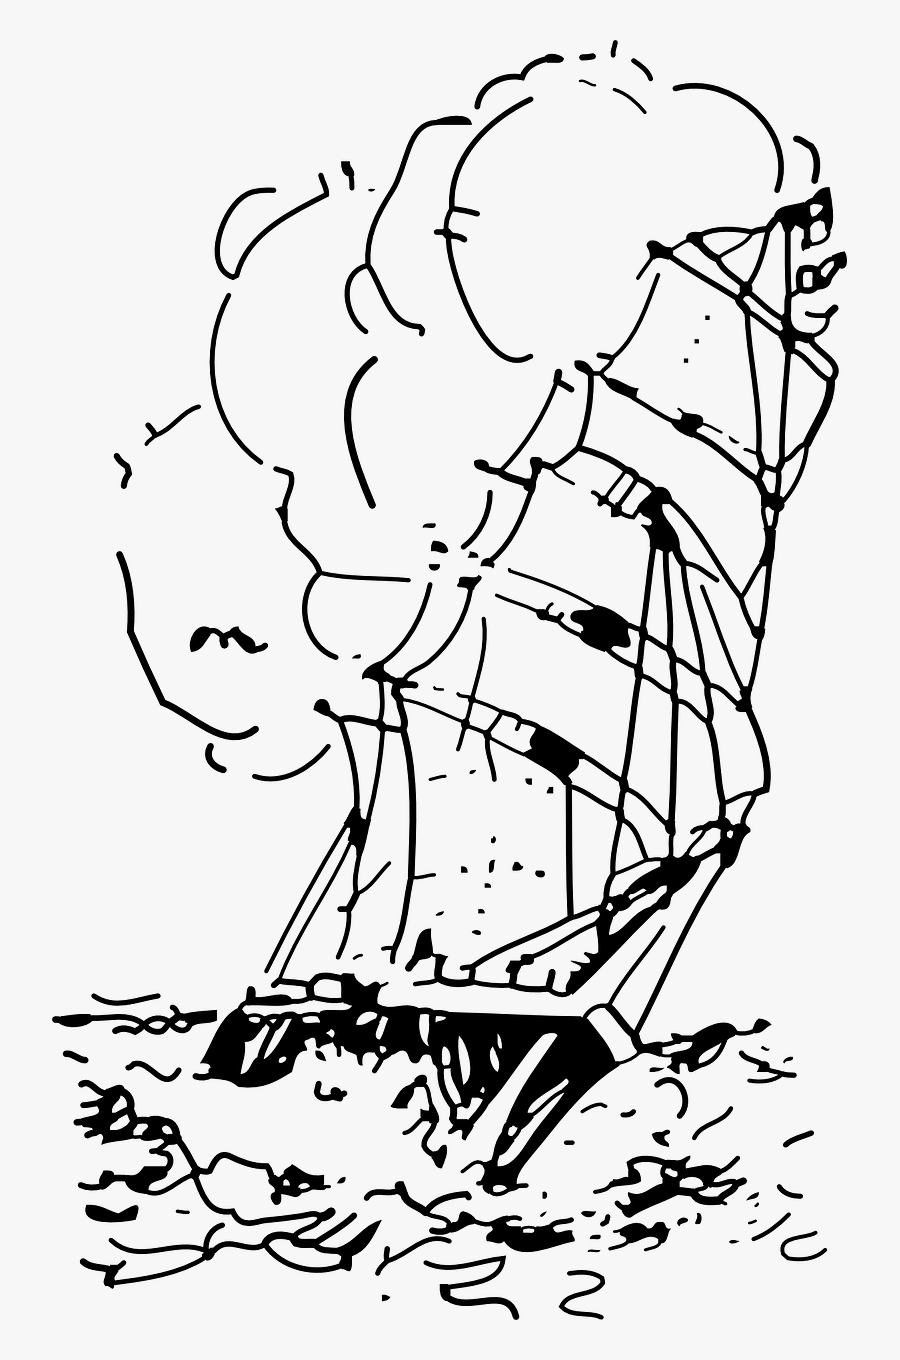 Pirate Boat Sailboat - Ship In Storm Clipart, Transparent Clipart